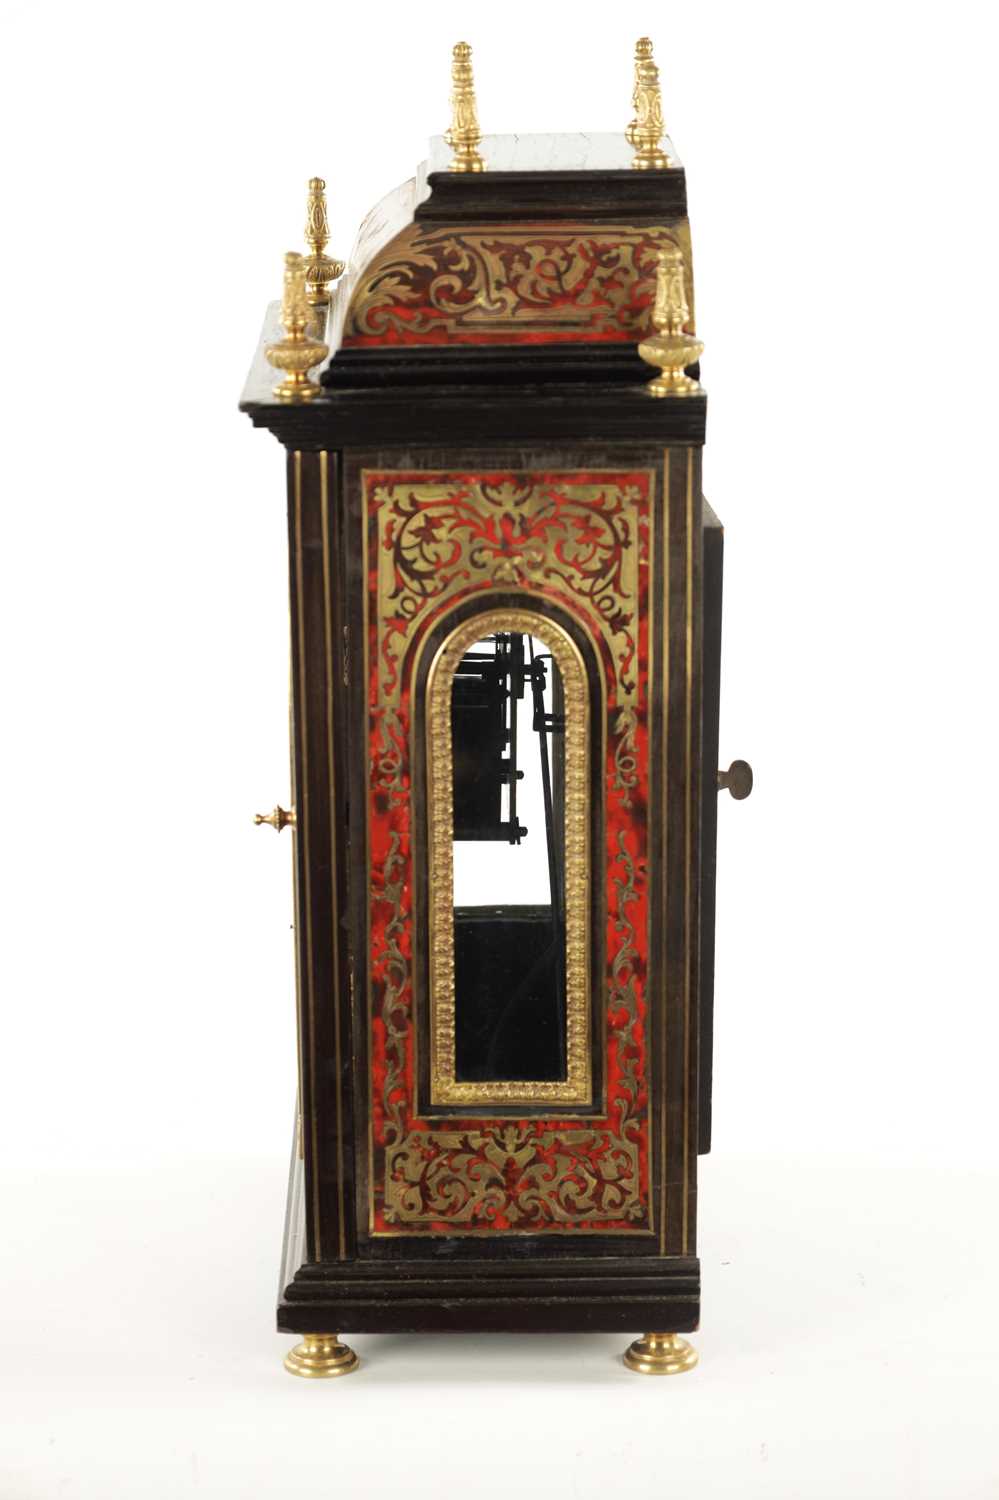 A LATE 19TH CENTURY FRENCH BOULLE MANTEL CLOCK - Image 5 of 10